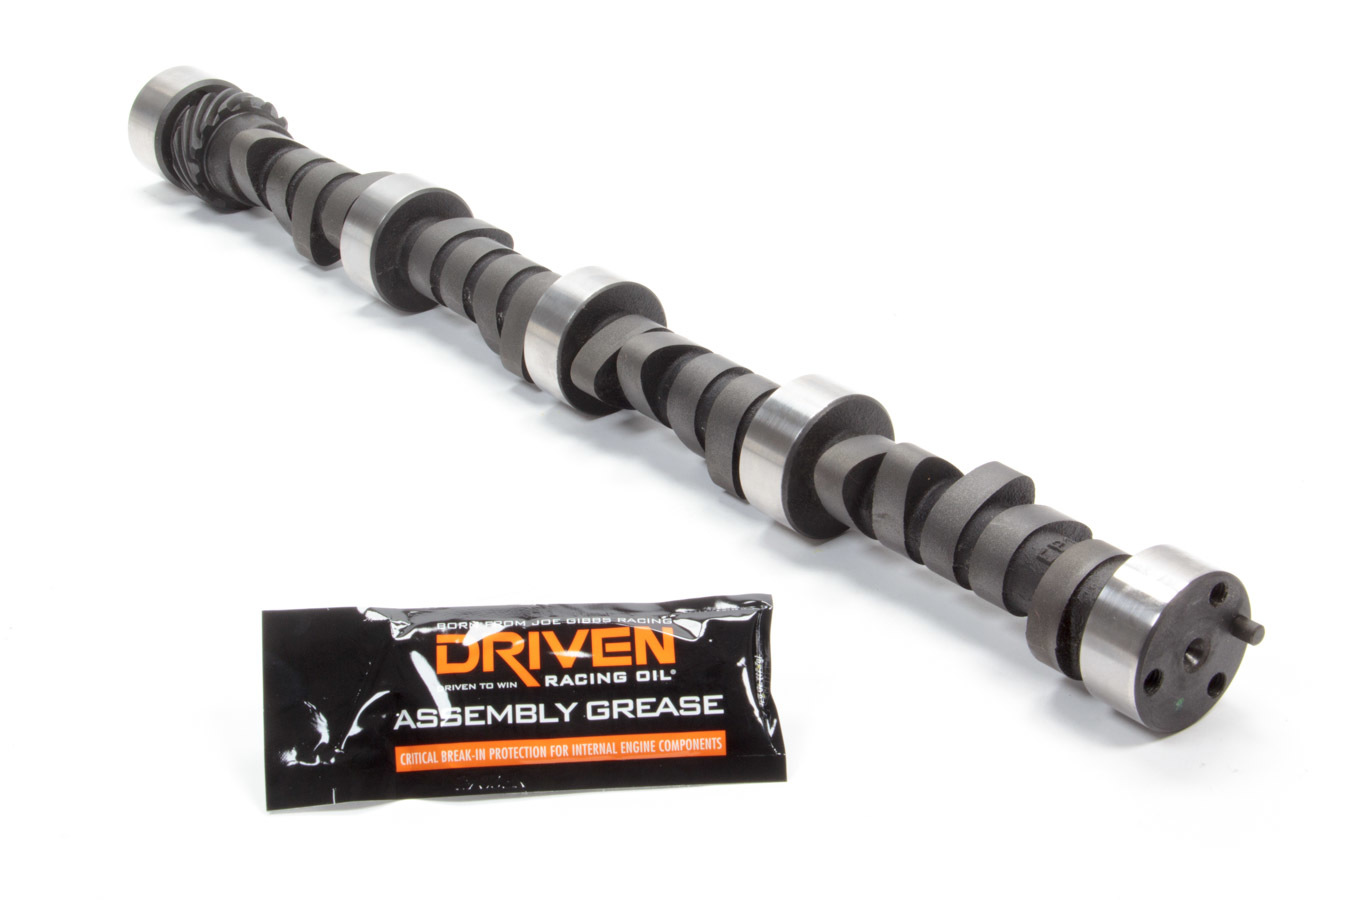 Howards Cams 110922-06S Camshaft, Mechanical Flat Tappet, Lift 0.540 / 0.560 in, Duration 280 / 287, 106 LSA, 3000 / 7200 RPM, Small Block Chevy, Each